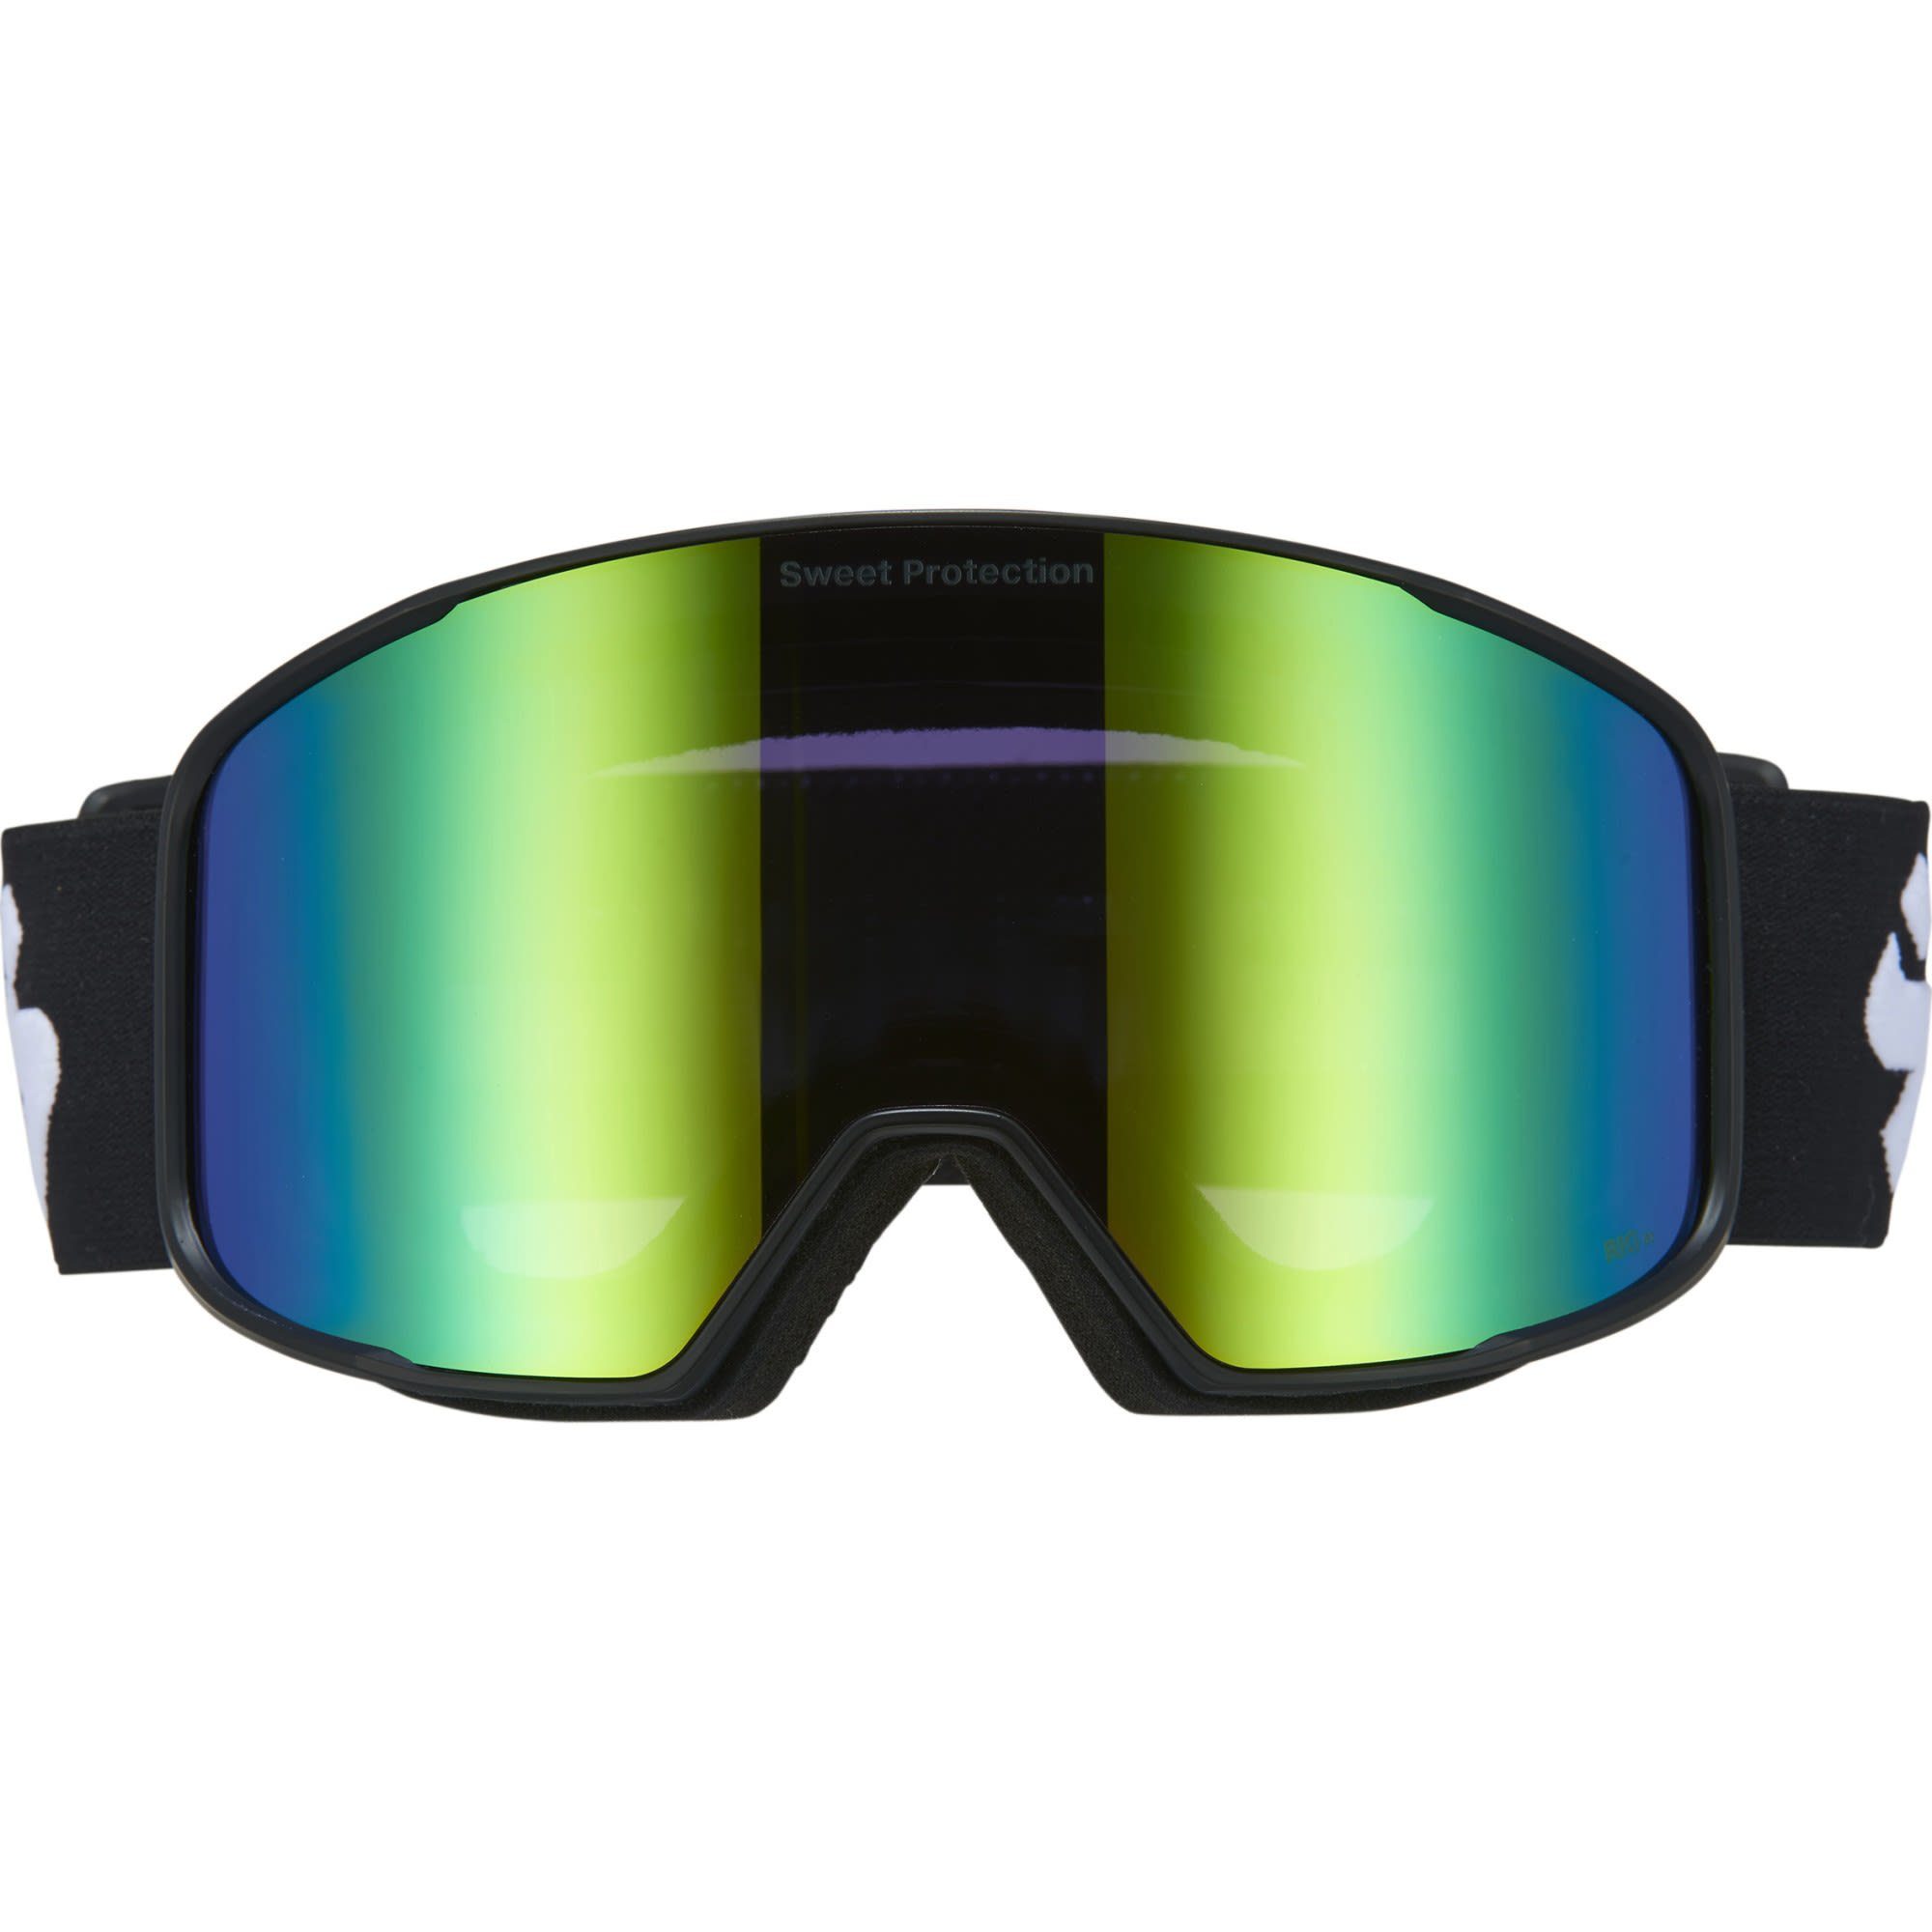 Sweet Protection Skibrille Sweet RIG Lens Protection Rig Reflect Emerald Boondock